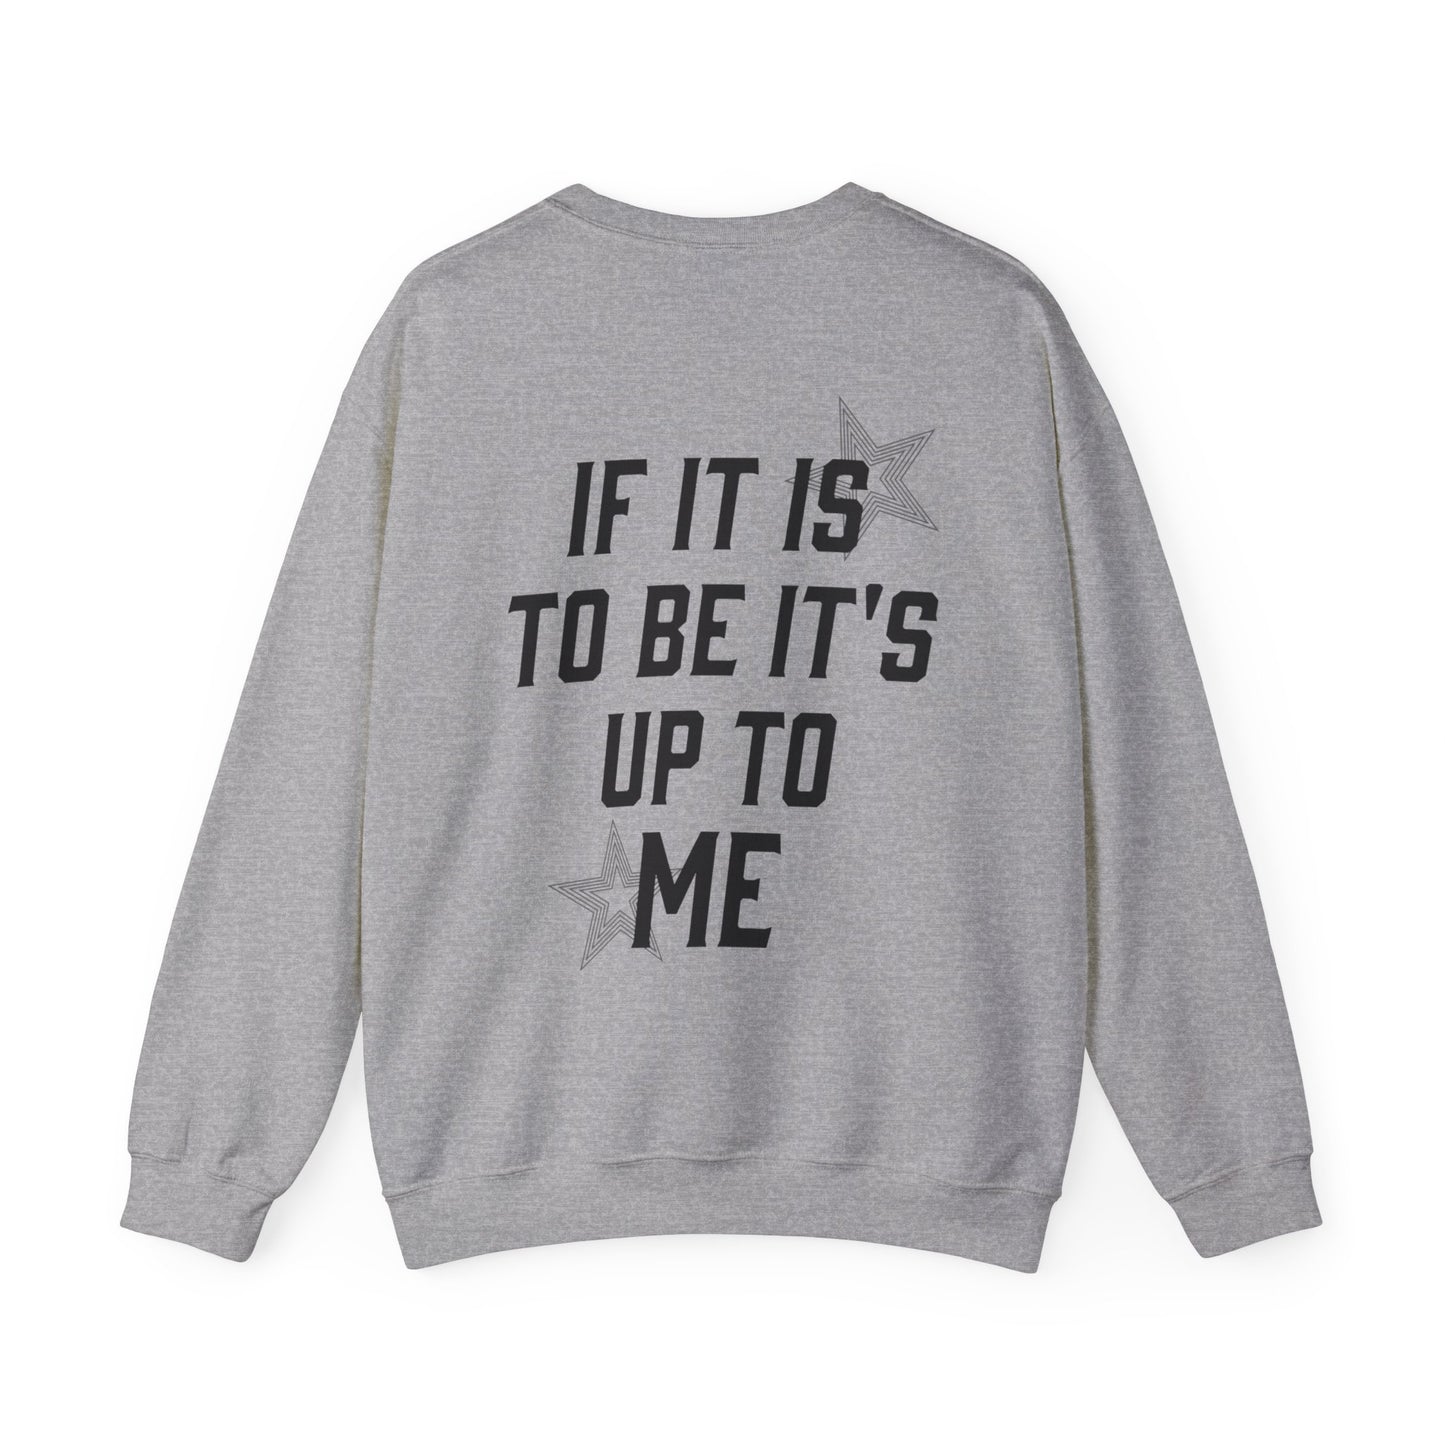 Zion Spotwood: If It Is To Be It's Up To Me Crewneck